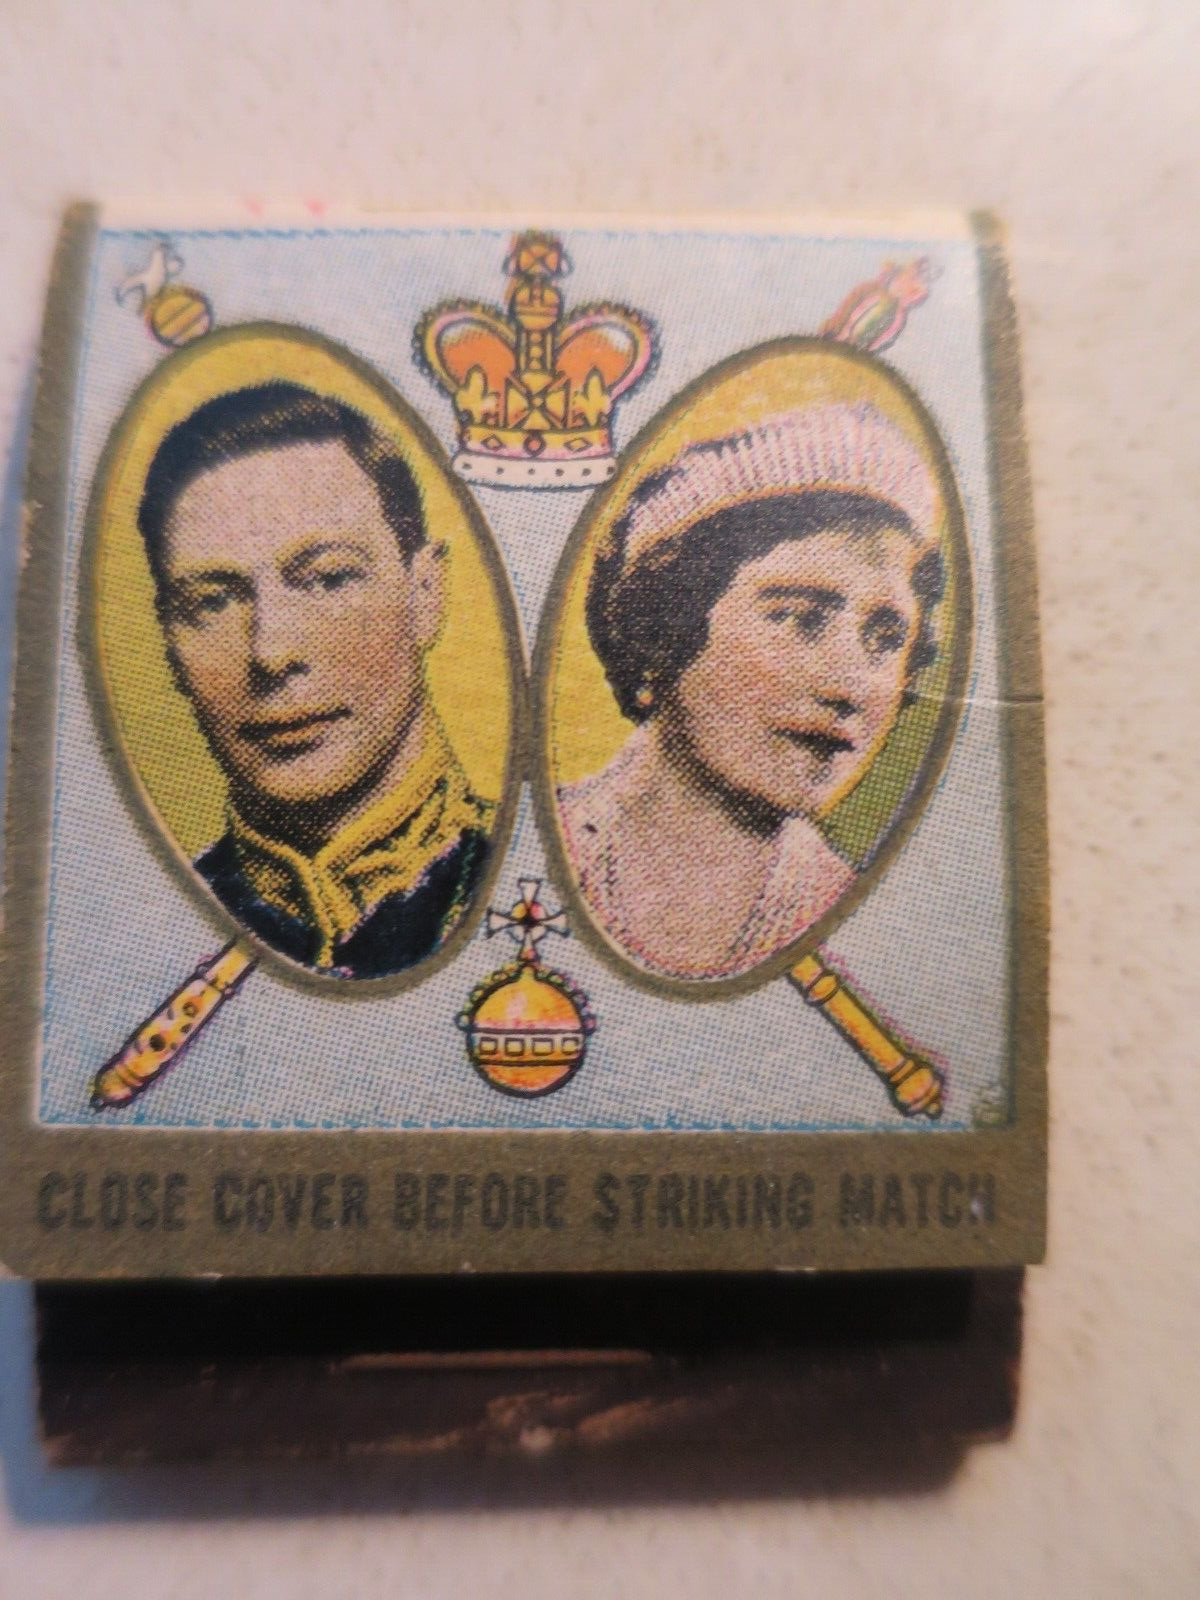 1939 Canada Welcomes Their Most Gracious Majesties King & Queen EMPTY Matchbook